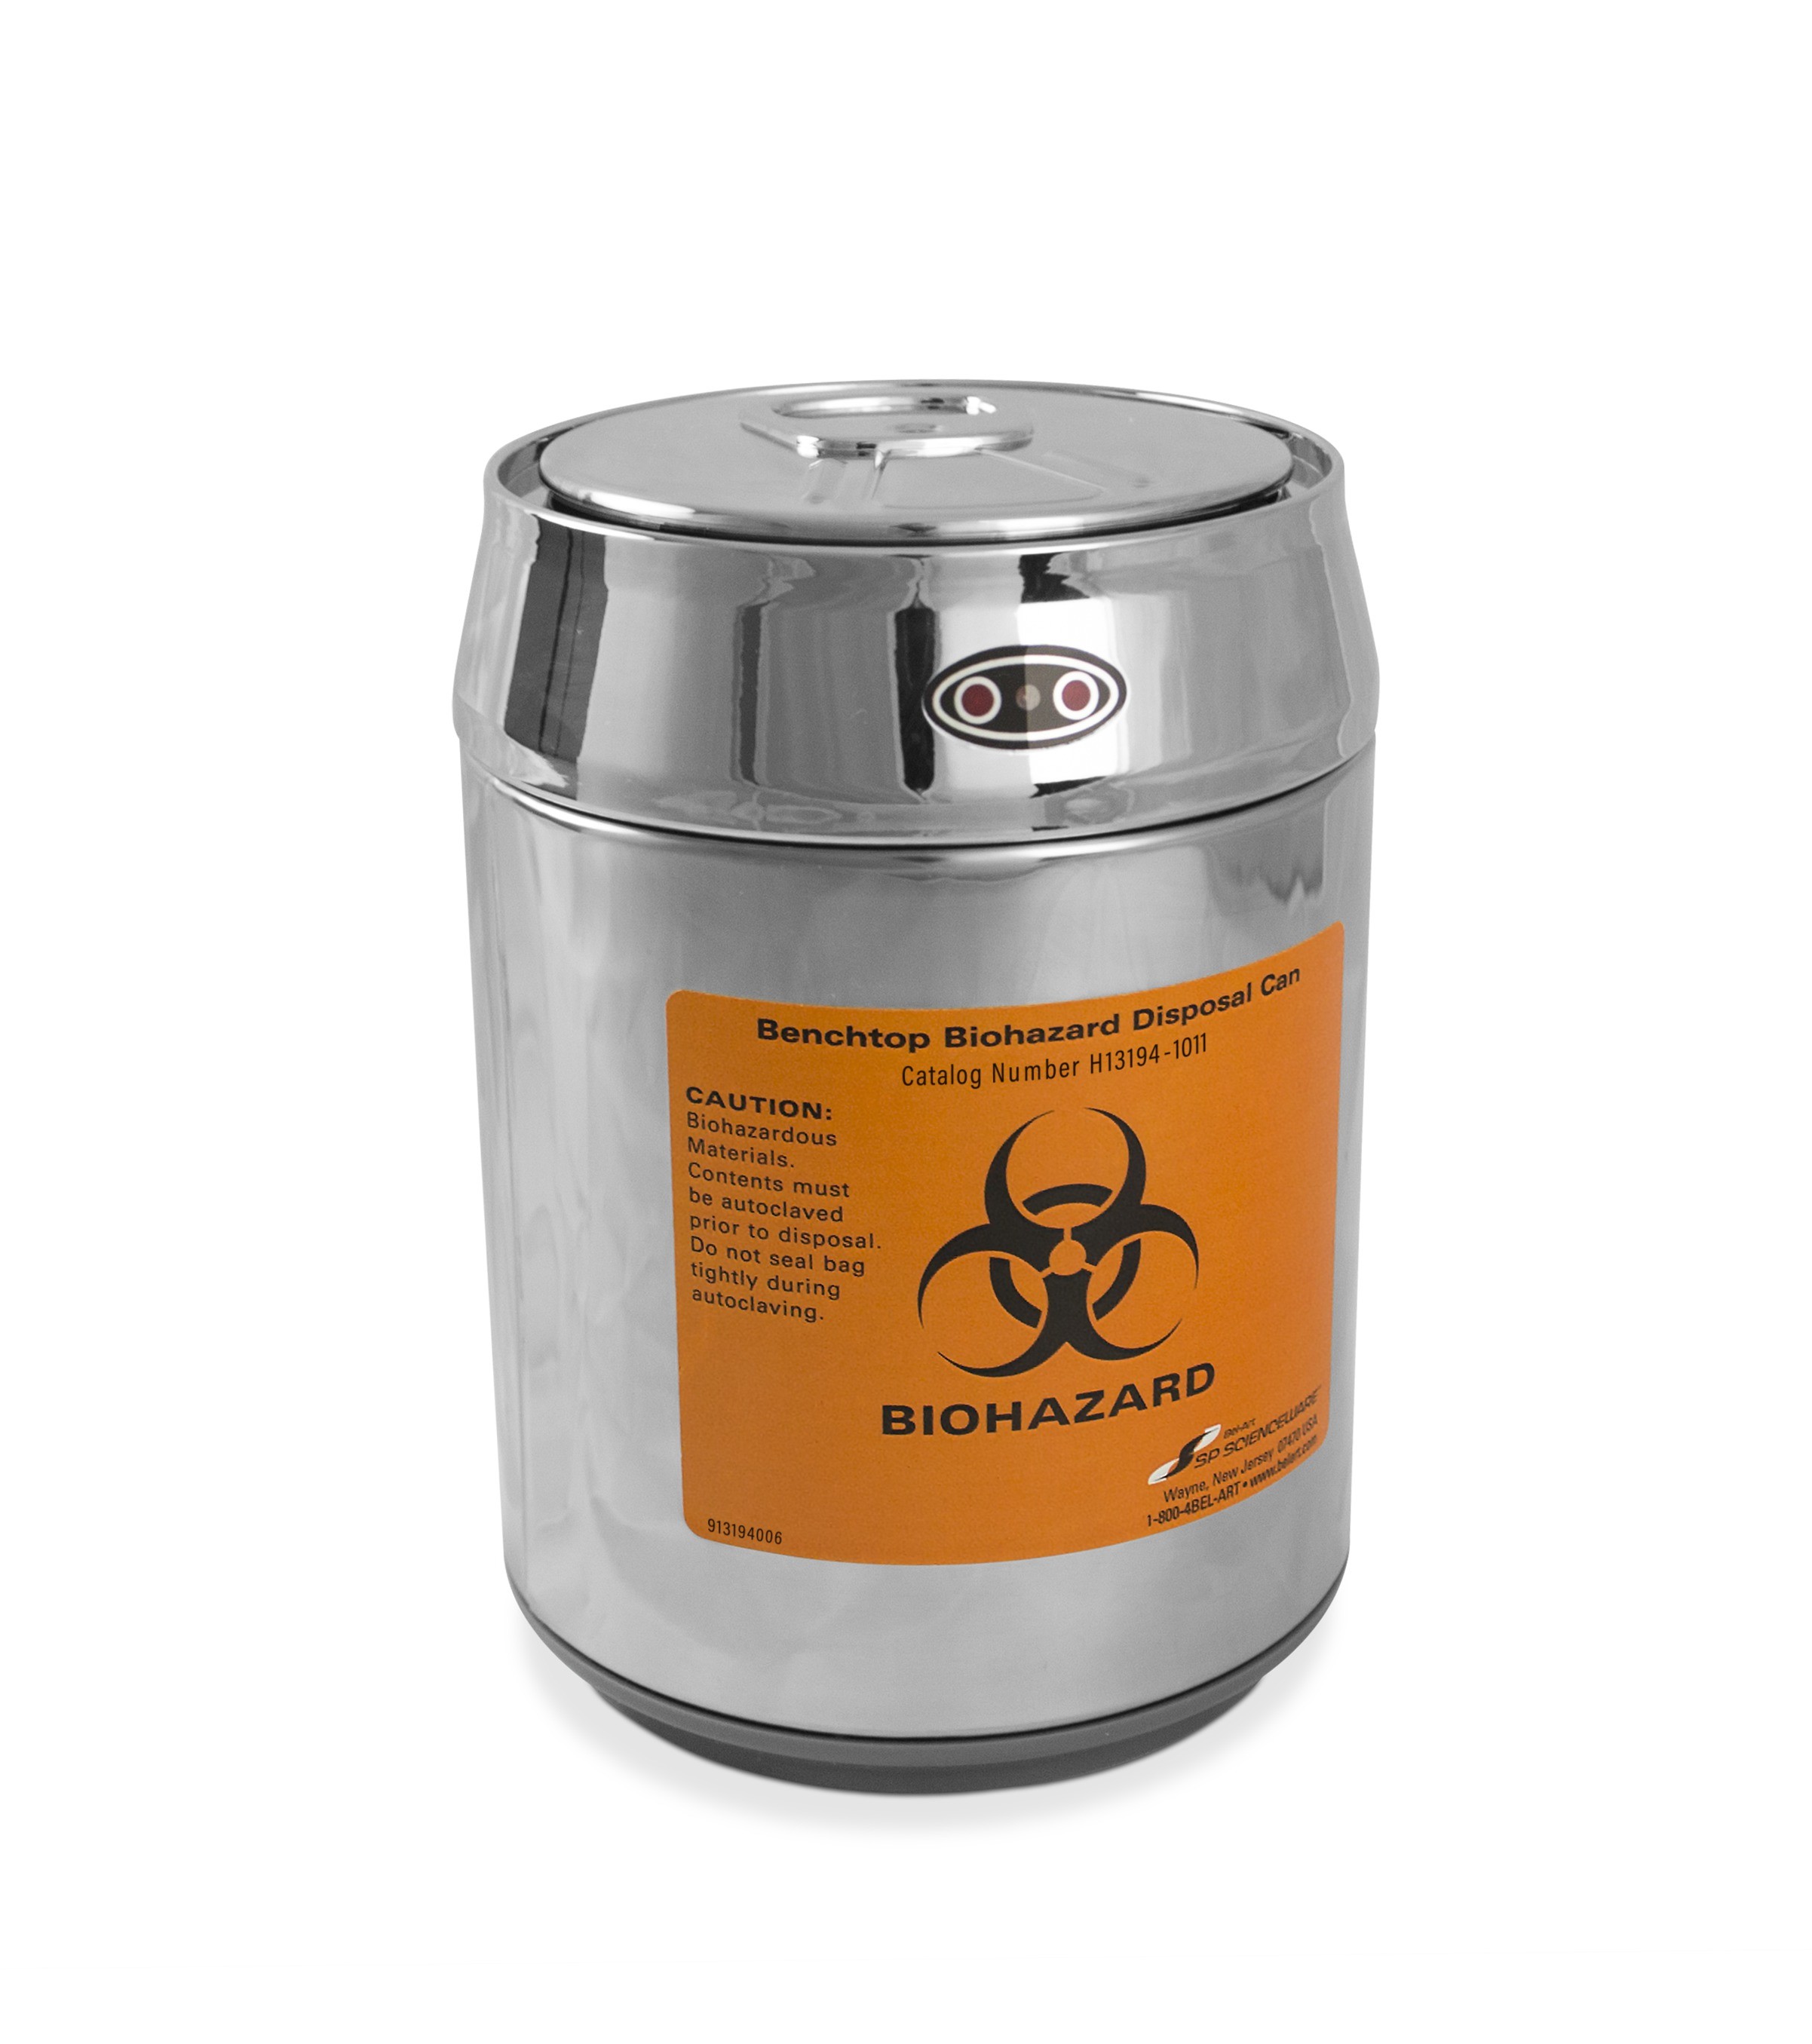 Benchtop Biohazard Disposal Can with Motion Sensor Lid